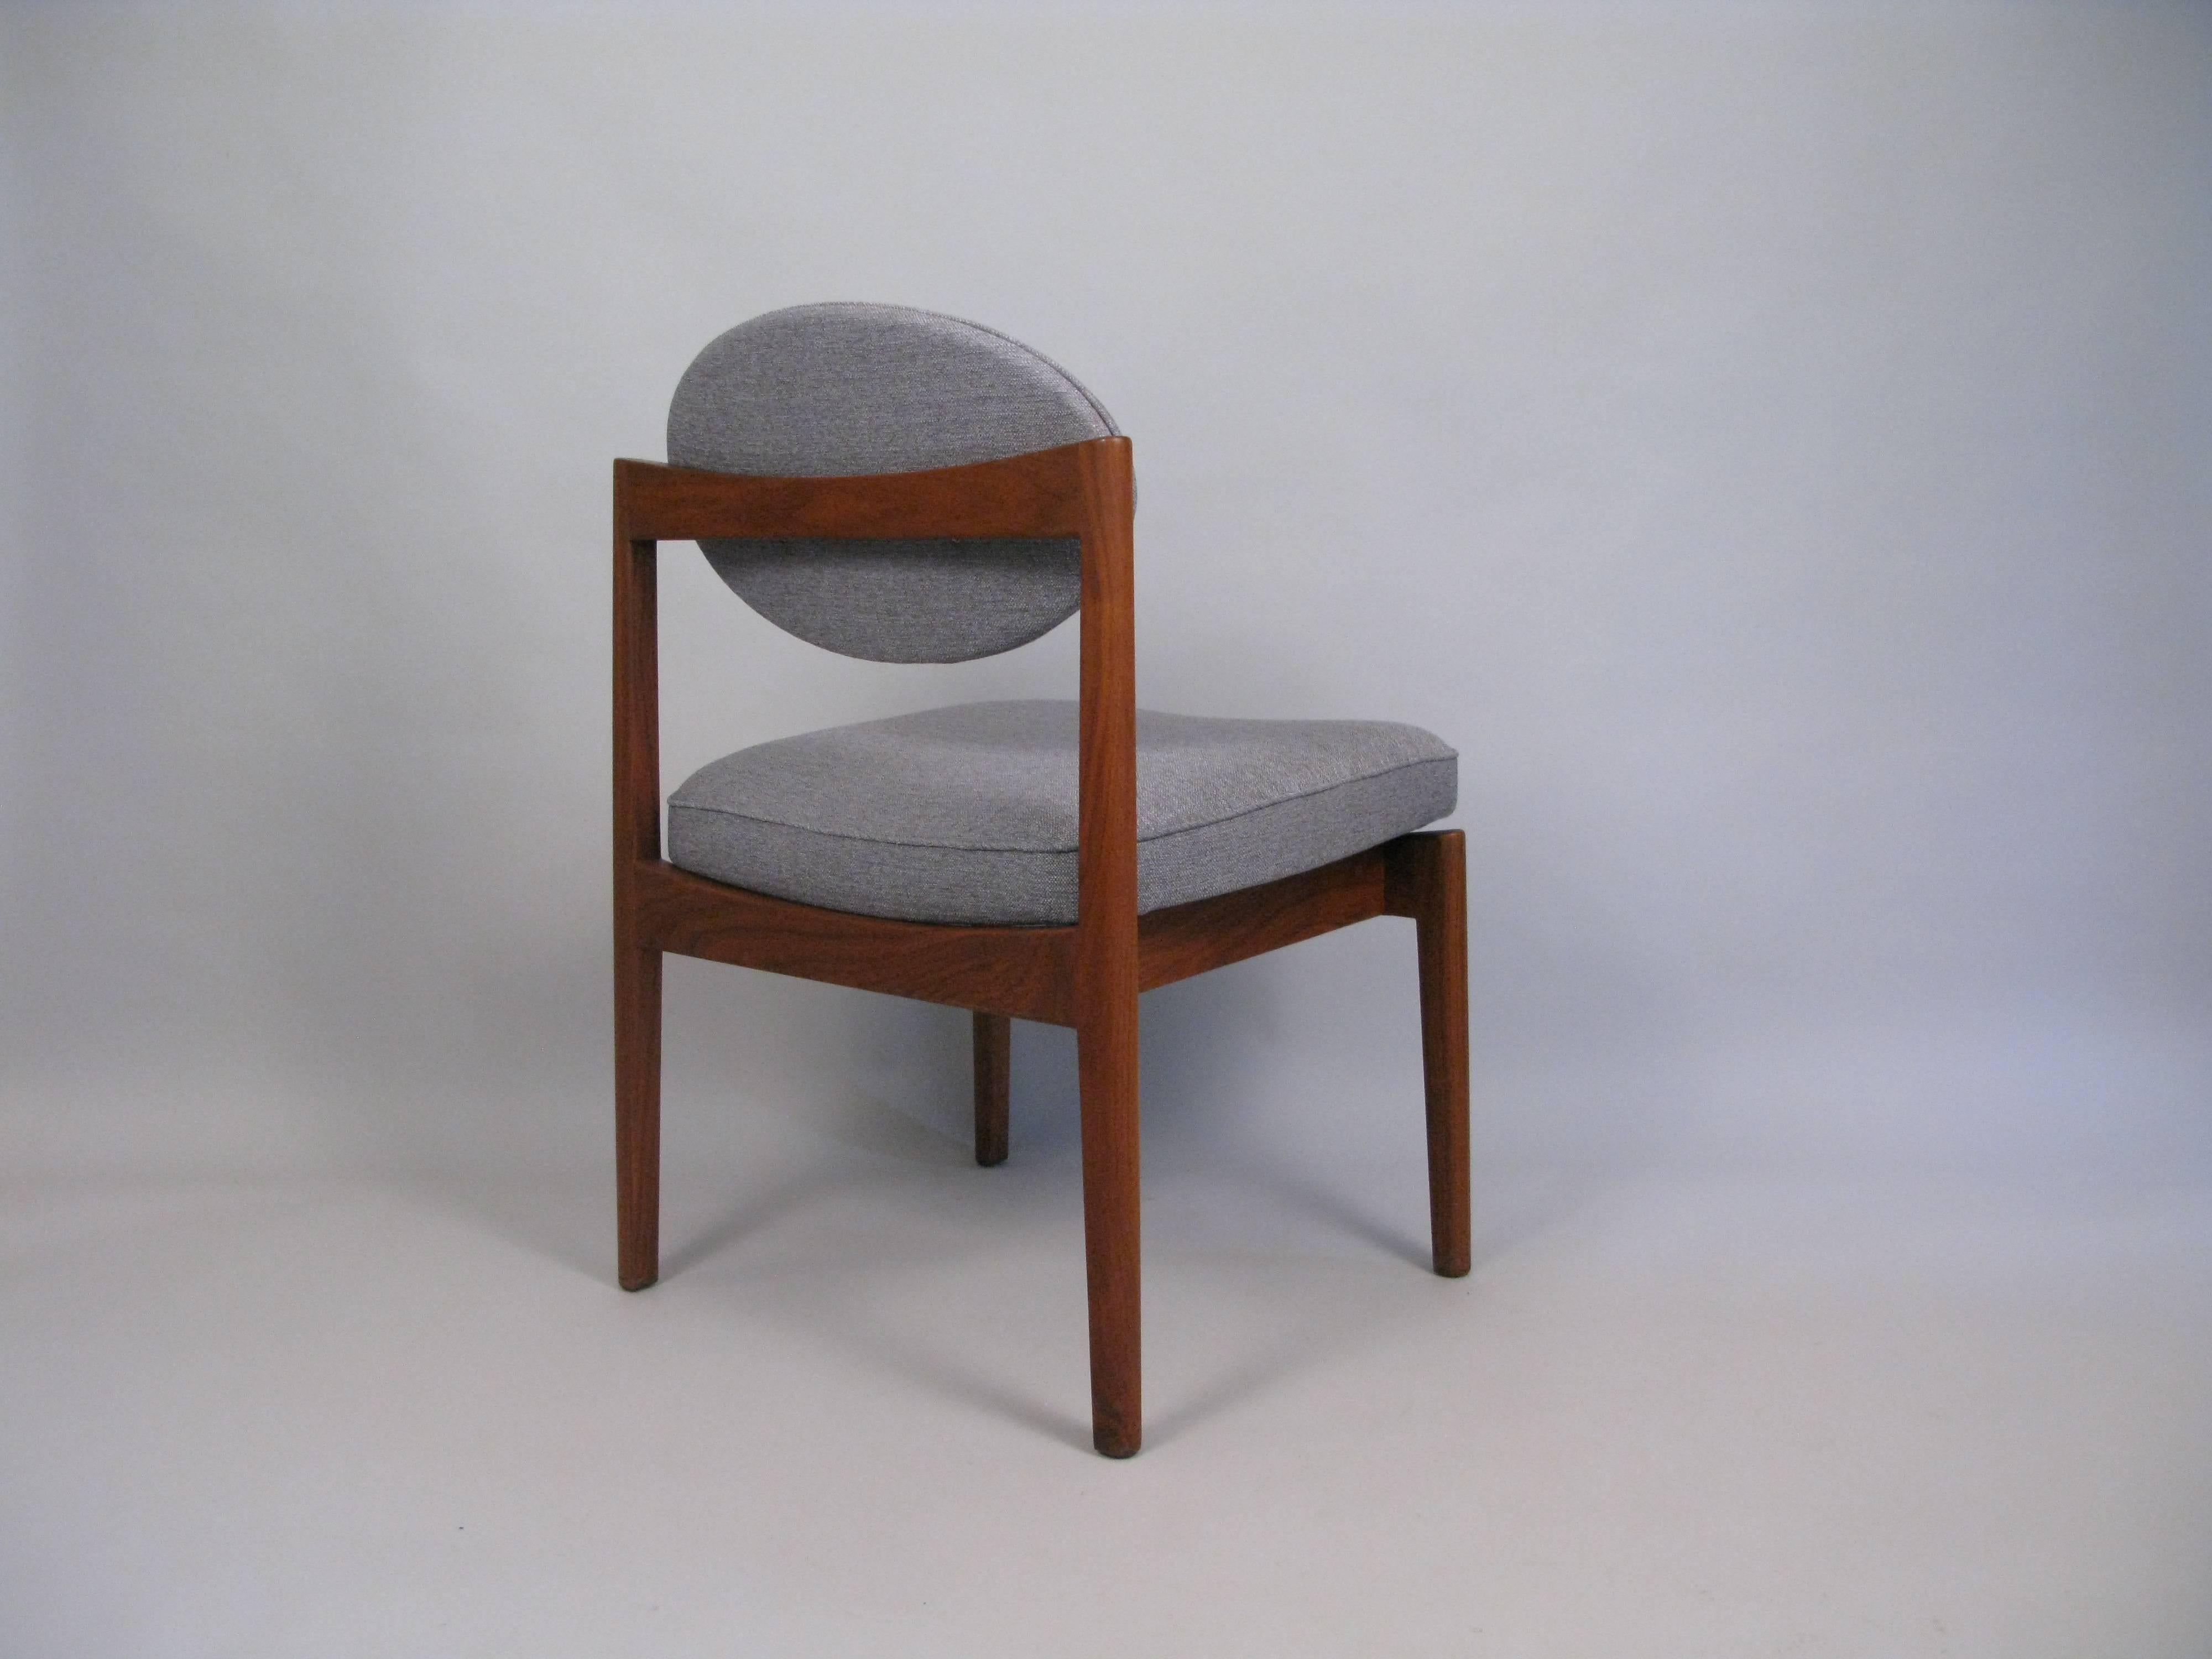 American Pair of Midcentury Teak Armless Upholstered Chairs by Jens Risom For Sale